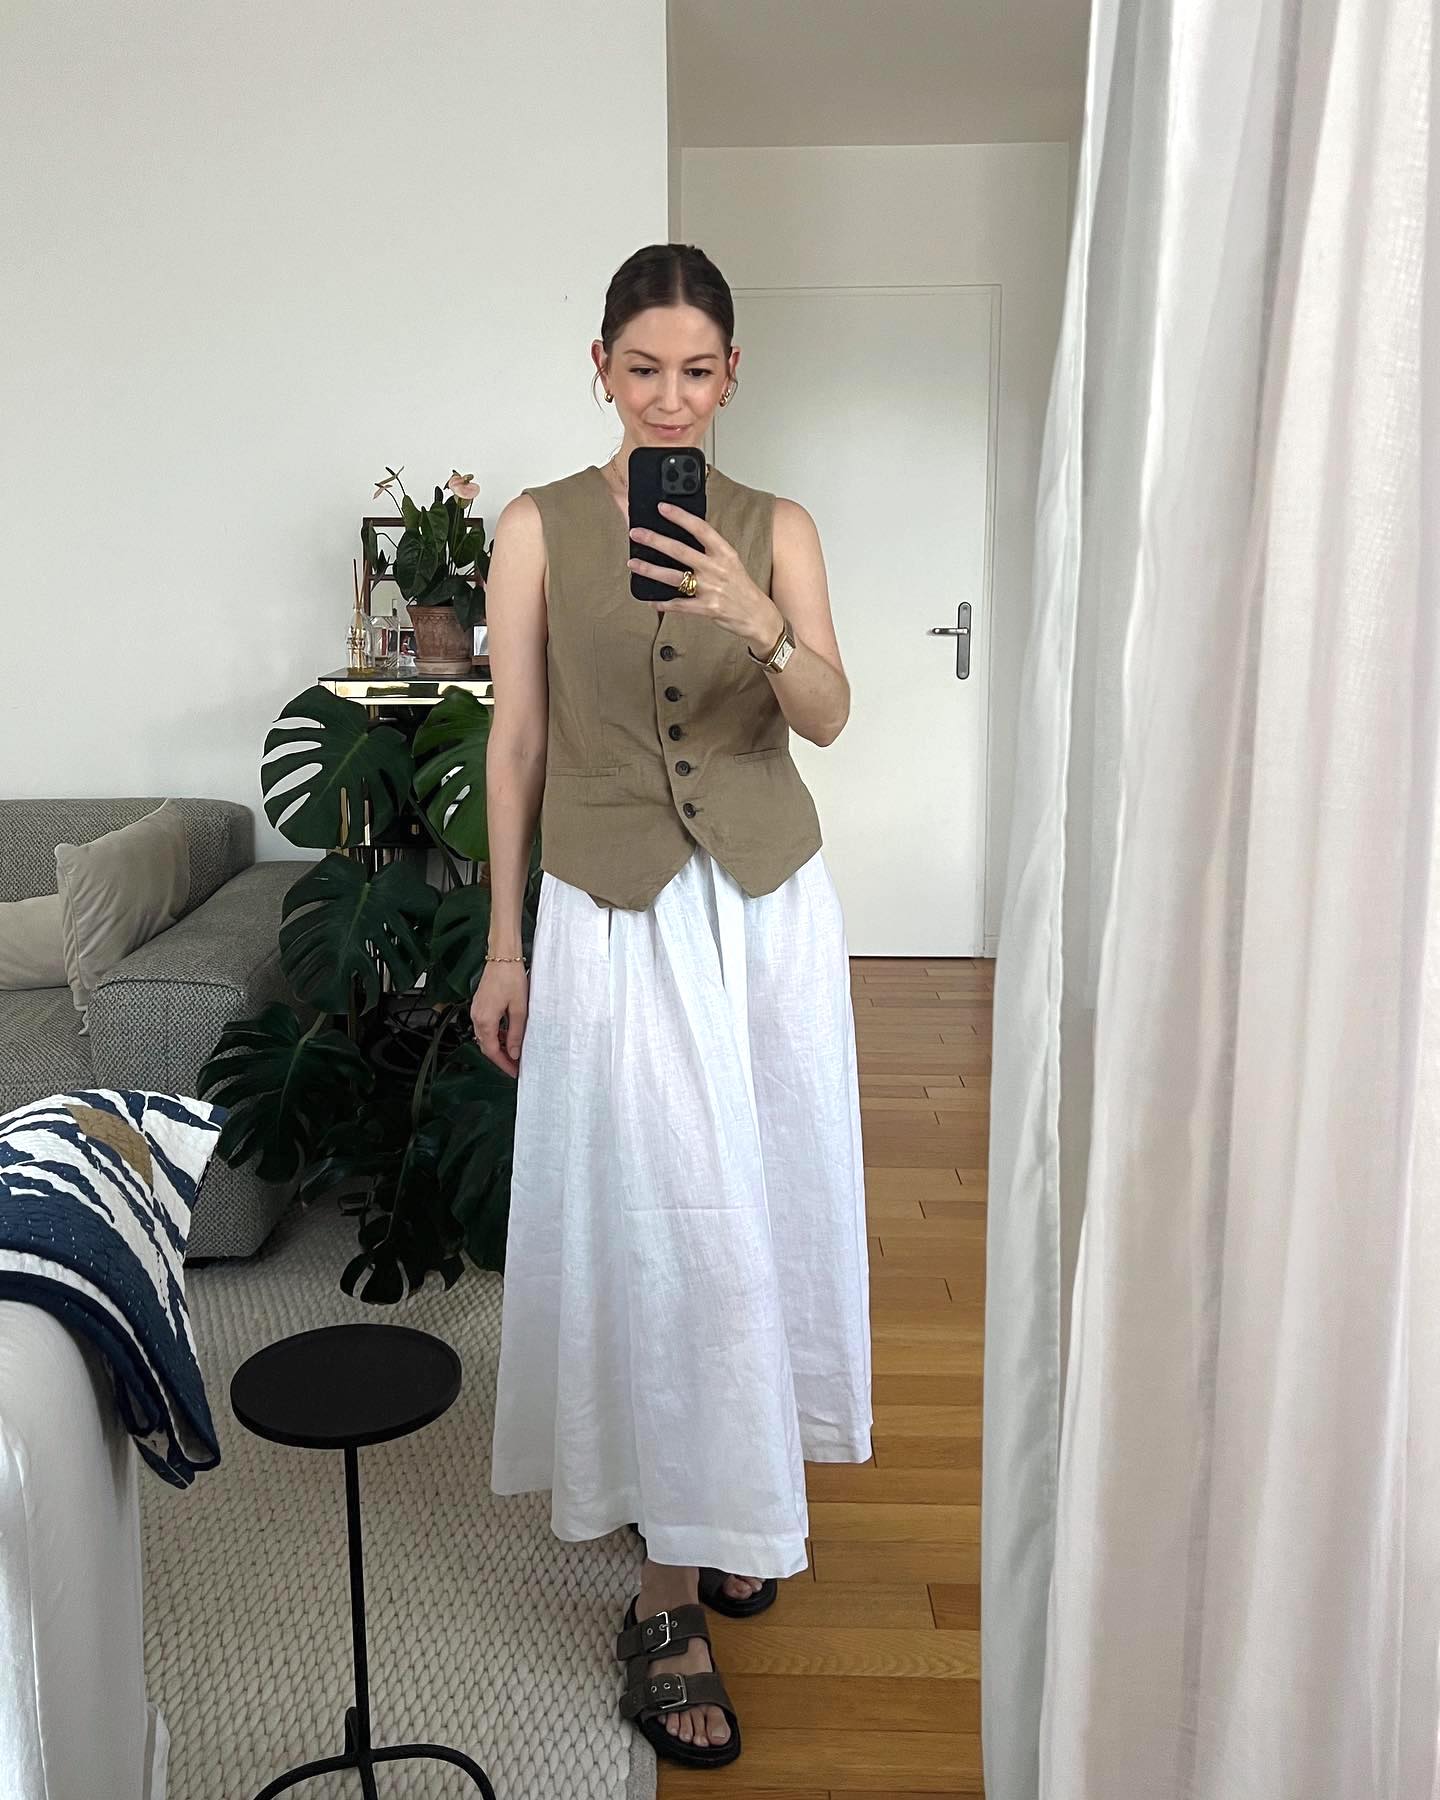 stylish fashion influencer poses for a mirror selfie in her living room wearing a tan button-down vest top, full white skirt, and buckled slide sandals